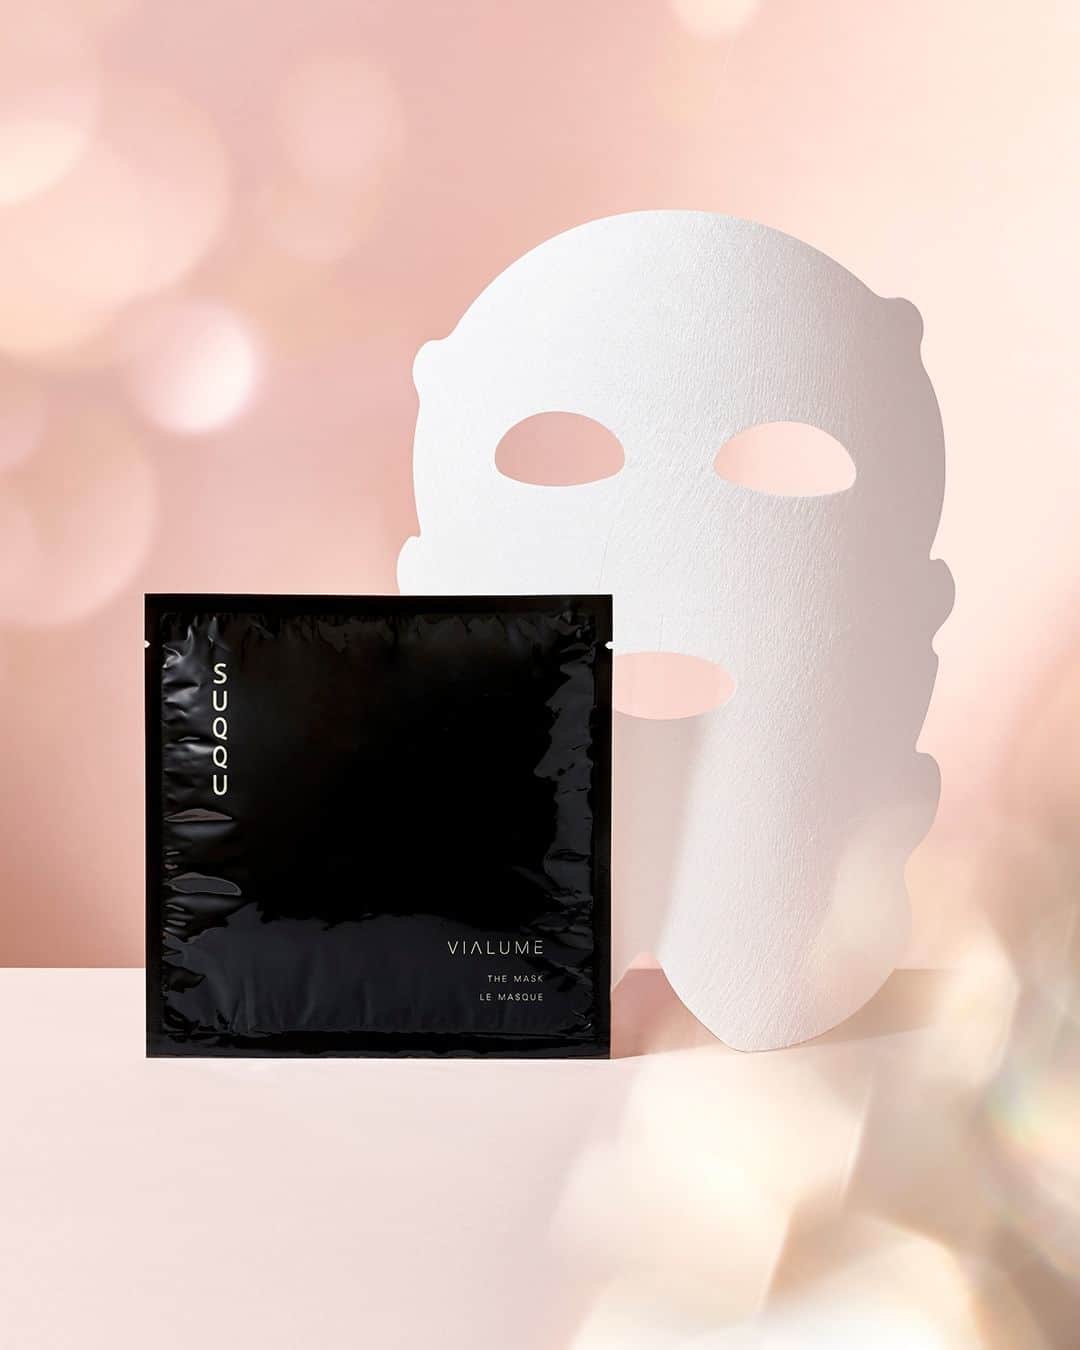 SUQQU公式Instgramアカウントのインスタグラム：「The winner of multiple BEST COSMETIC AWARDS* 2023 Second-Half. SUQQU VIALUME THE MASK is a luxurious sheet mask coated with a rich, cream formula. For sophisticated radiance and feel soft, firm, and hydrated skin. VIALUME THE MASK * See our website for more details. (only Japanese)  2023年下半期ベストコスメアワードを多数受賞*。 クリーム仕立ての濃密液を含み、独自構造で密着させる贅を尽くした艶肌へ導くシートマスク。肌に丁寧な艶をもたらし、もっちりとしたハリ感、うるおいを。 ヴィアルム ザ マスク  *詳細はブランドサイトにて  #SUQQU #スック #jbeauty #cosmetics #SUQQU20th #SUQQUskincare #ベストコスメ #ベストコスメ2023 #bestcosmetics #新作 #newproduct」